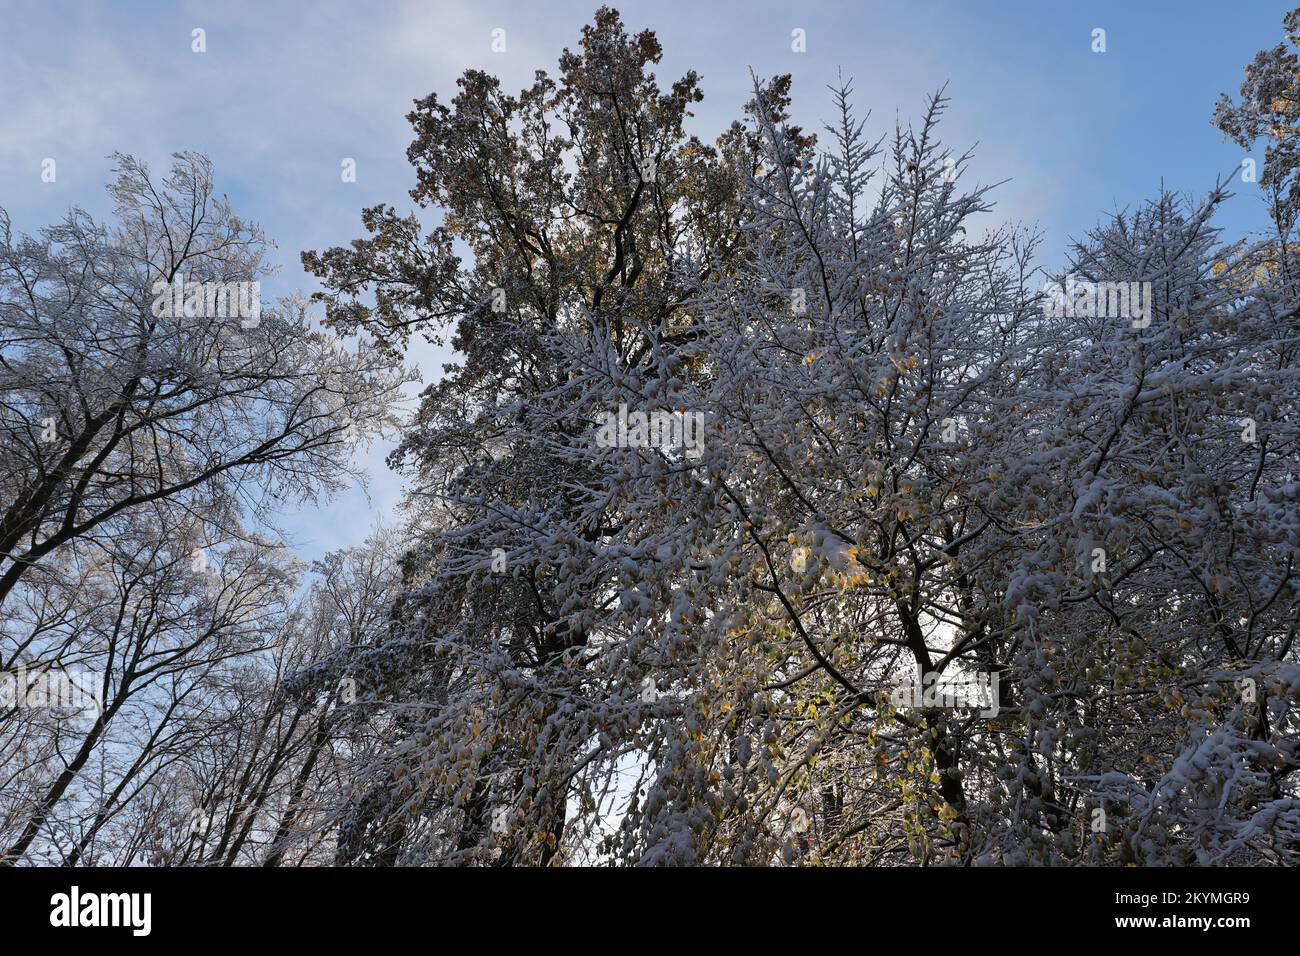 beautiful view of wintry treetops against a blue cloudy sky Stock Photo